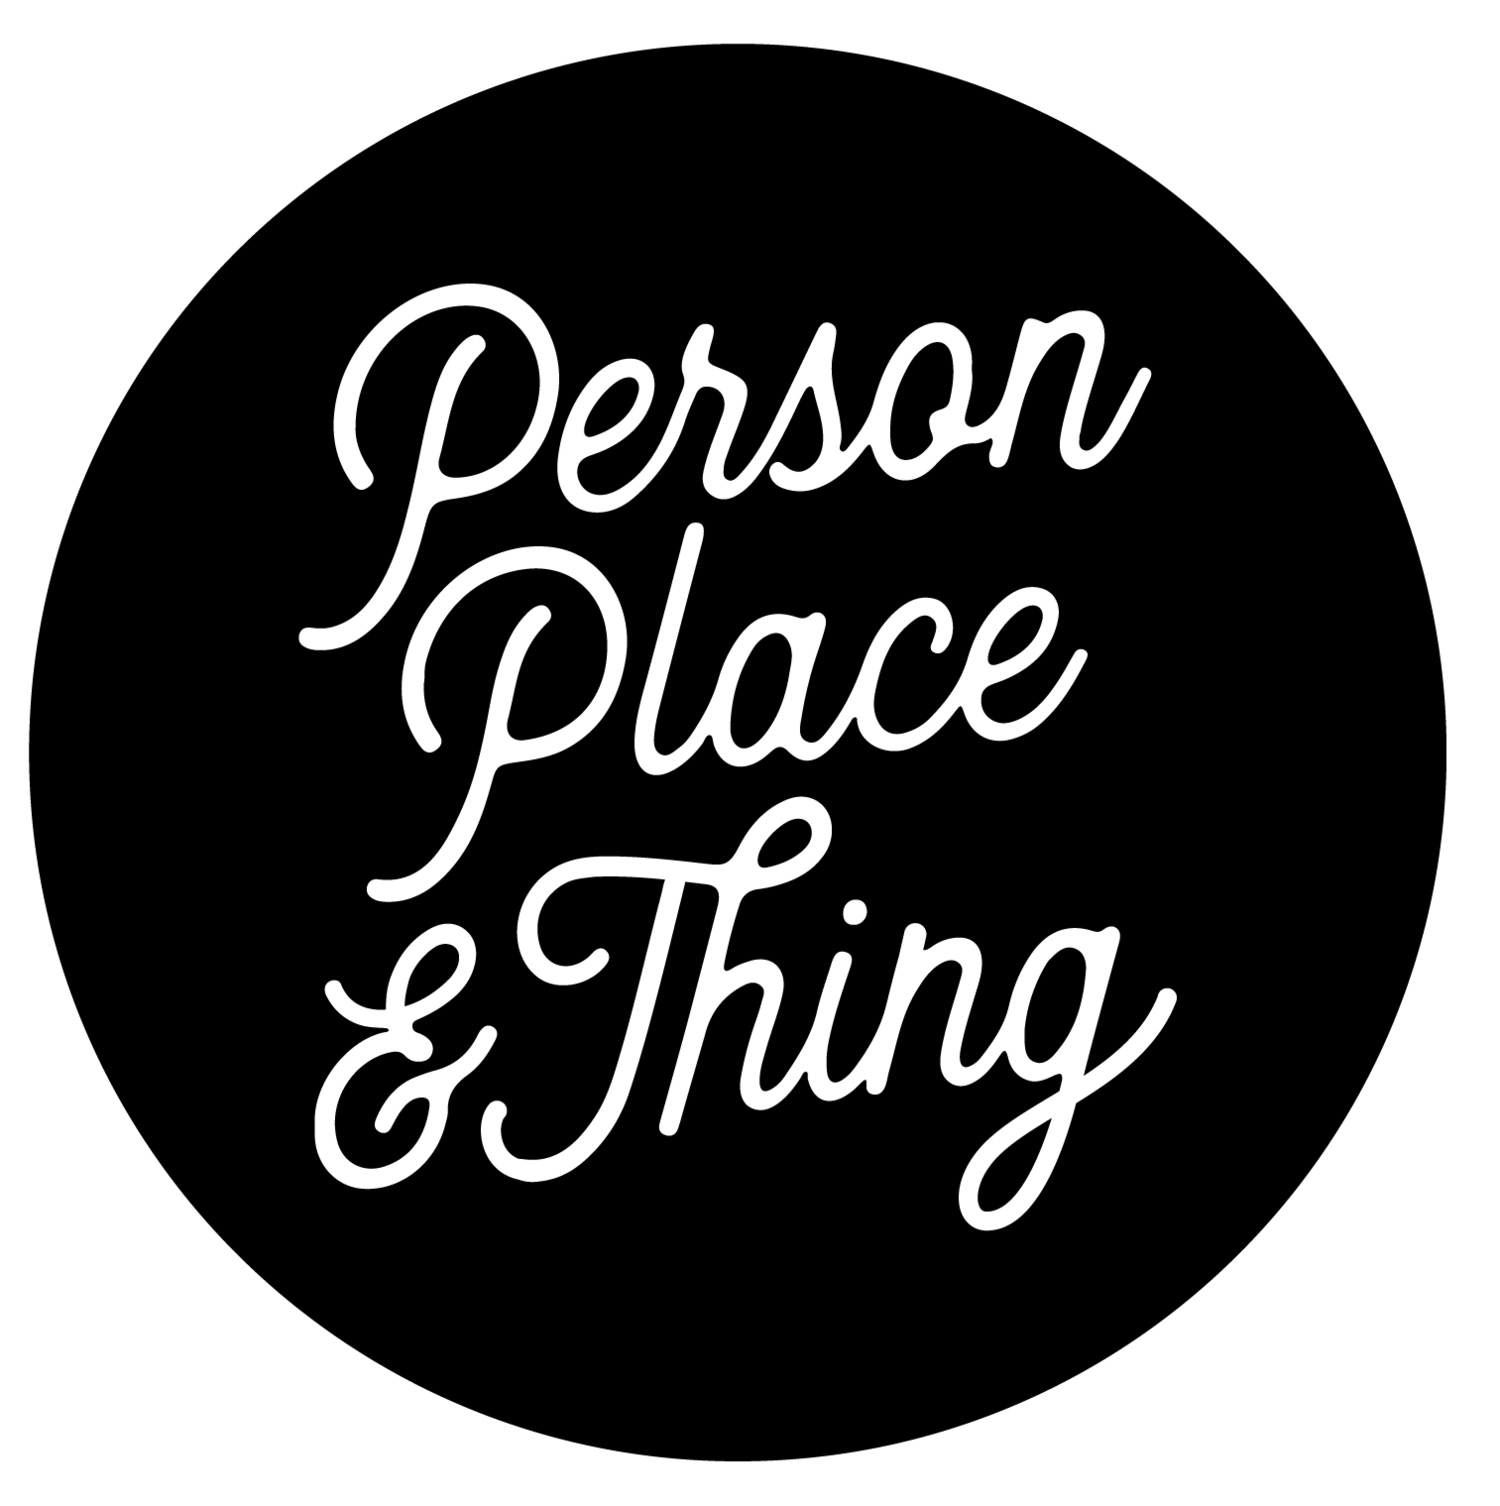 PERSON PLACE & THING